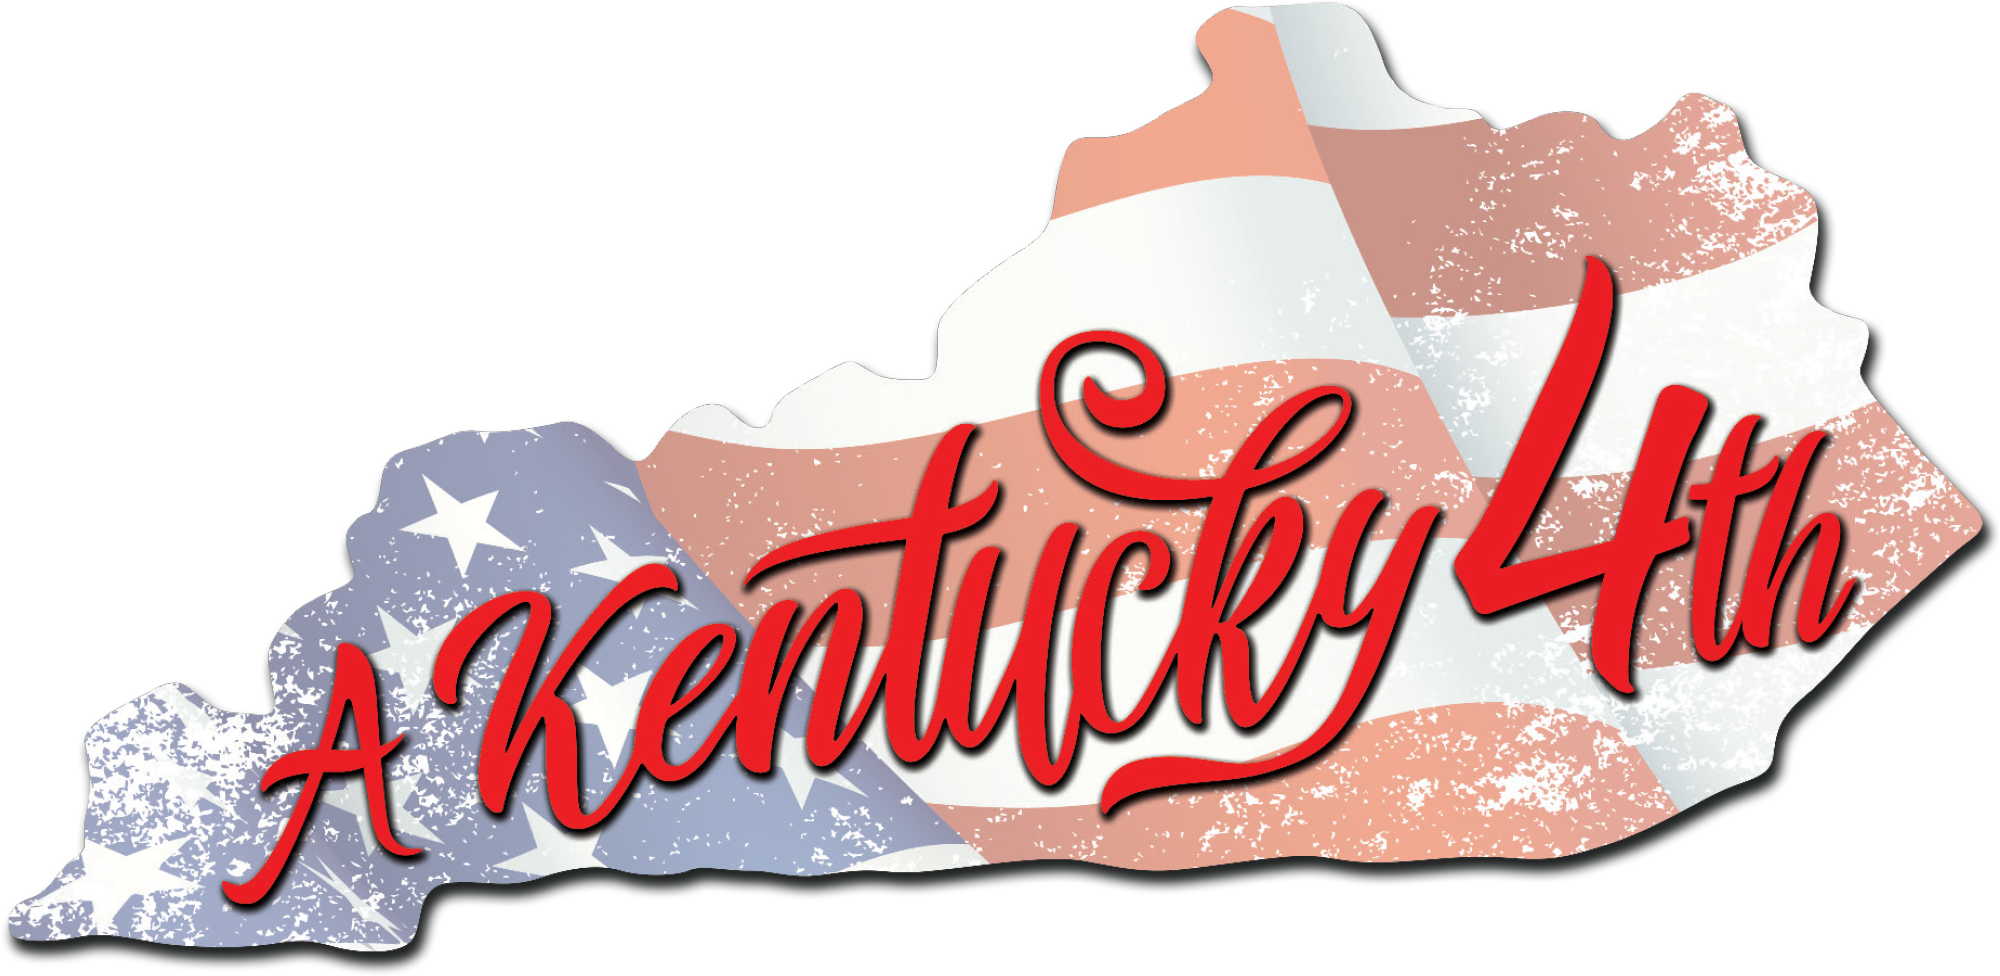 A Kentucky 4th typography